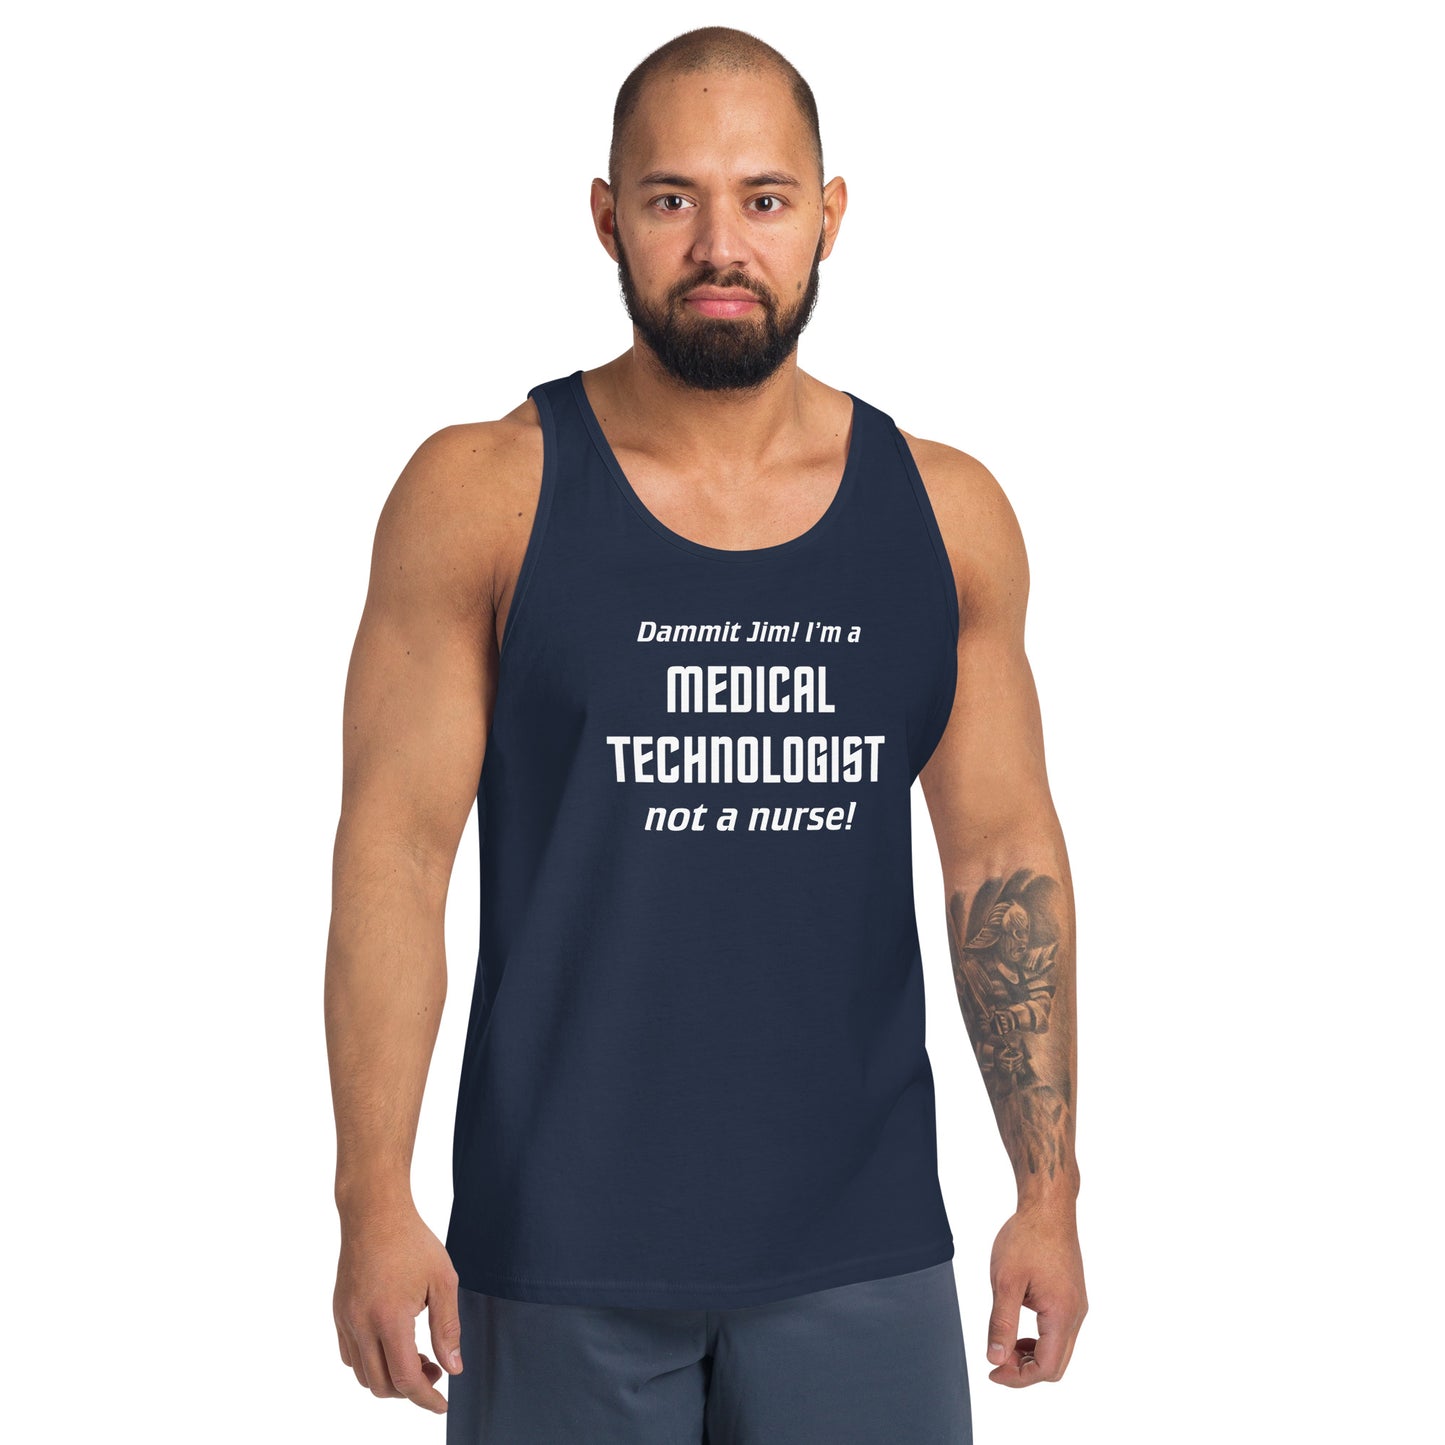 Model wearing navy tank top with text graphic in Star Trek font: "Dammit Jim! I'm a MEDICAL TECHNOLOGIST not a nurse!"